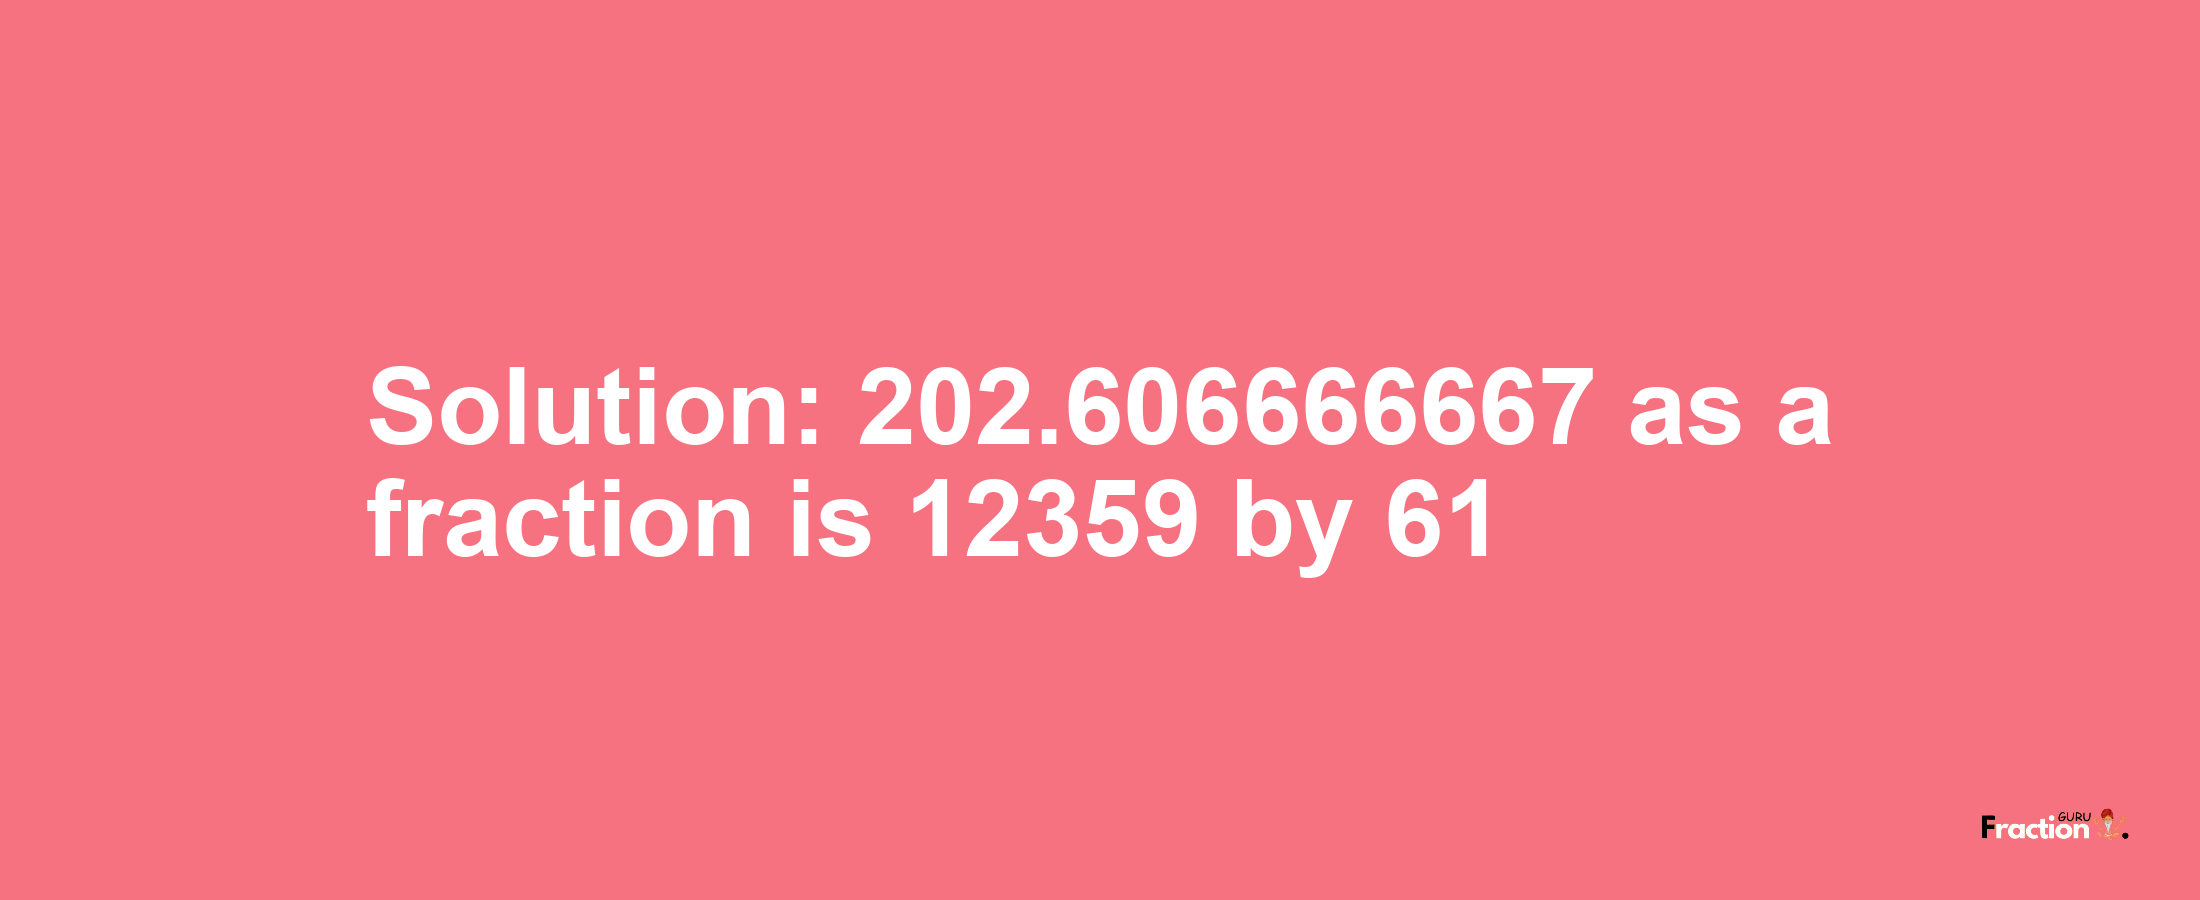 Solution:202.606666667 as a fraction is 12359/61